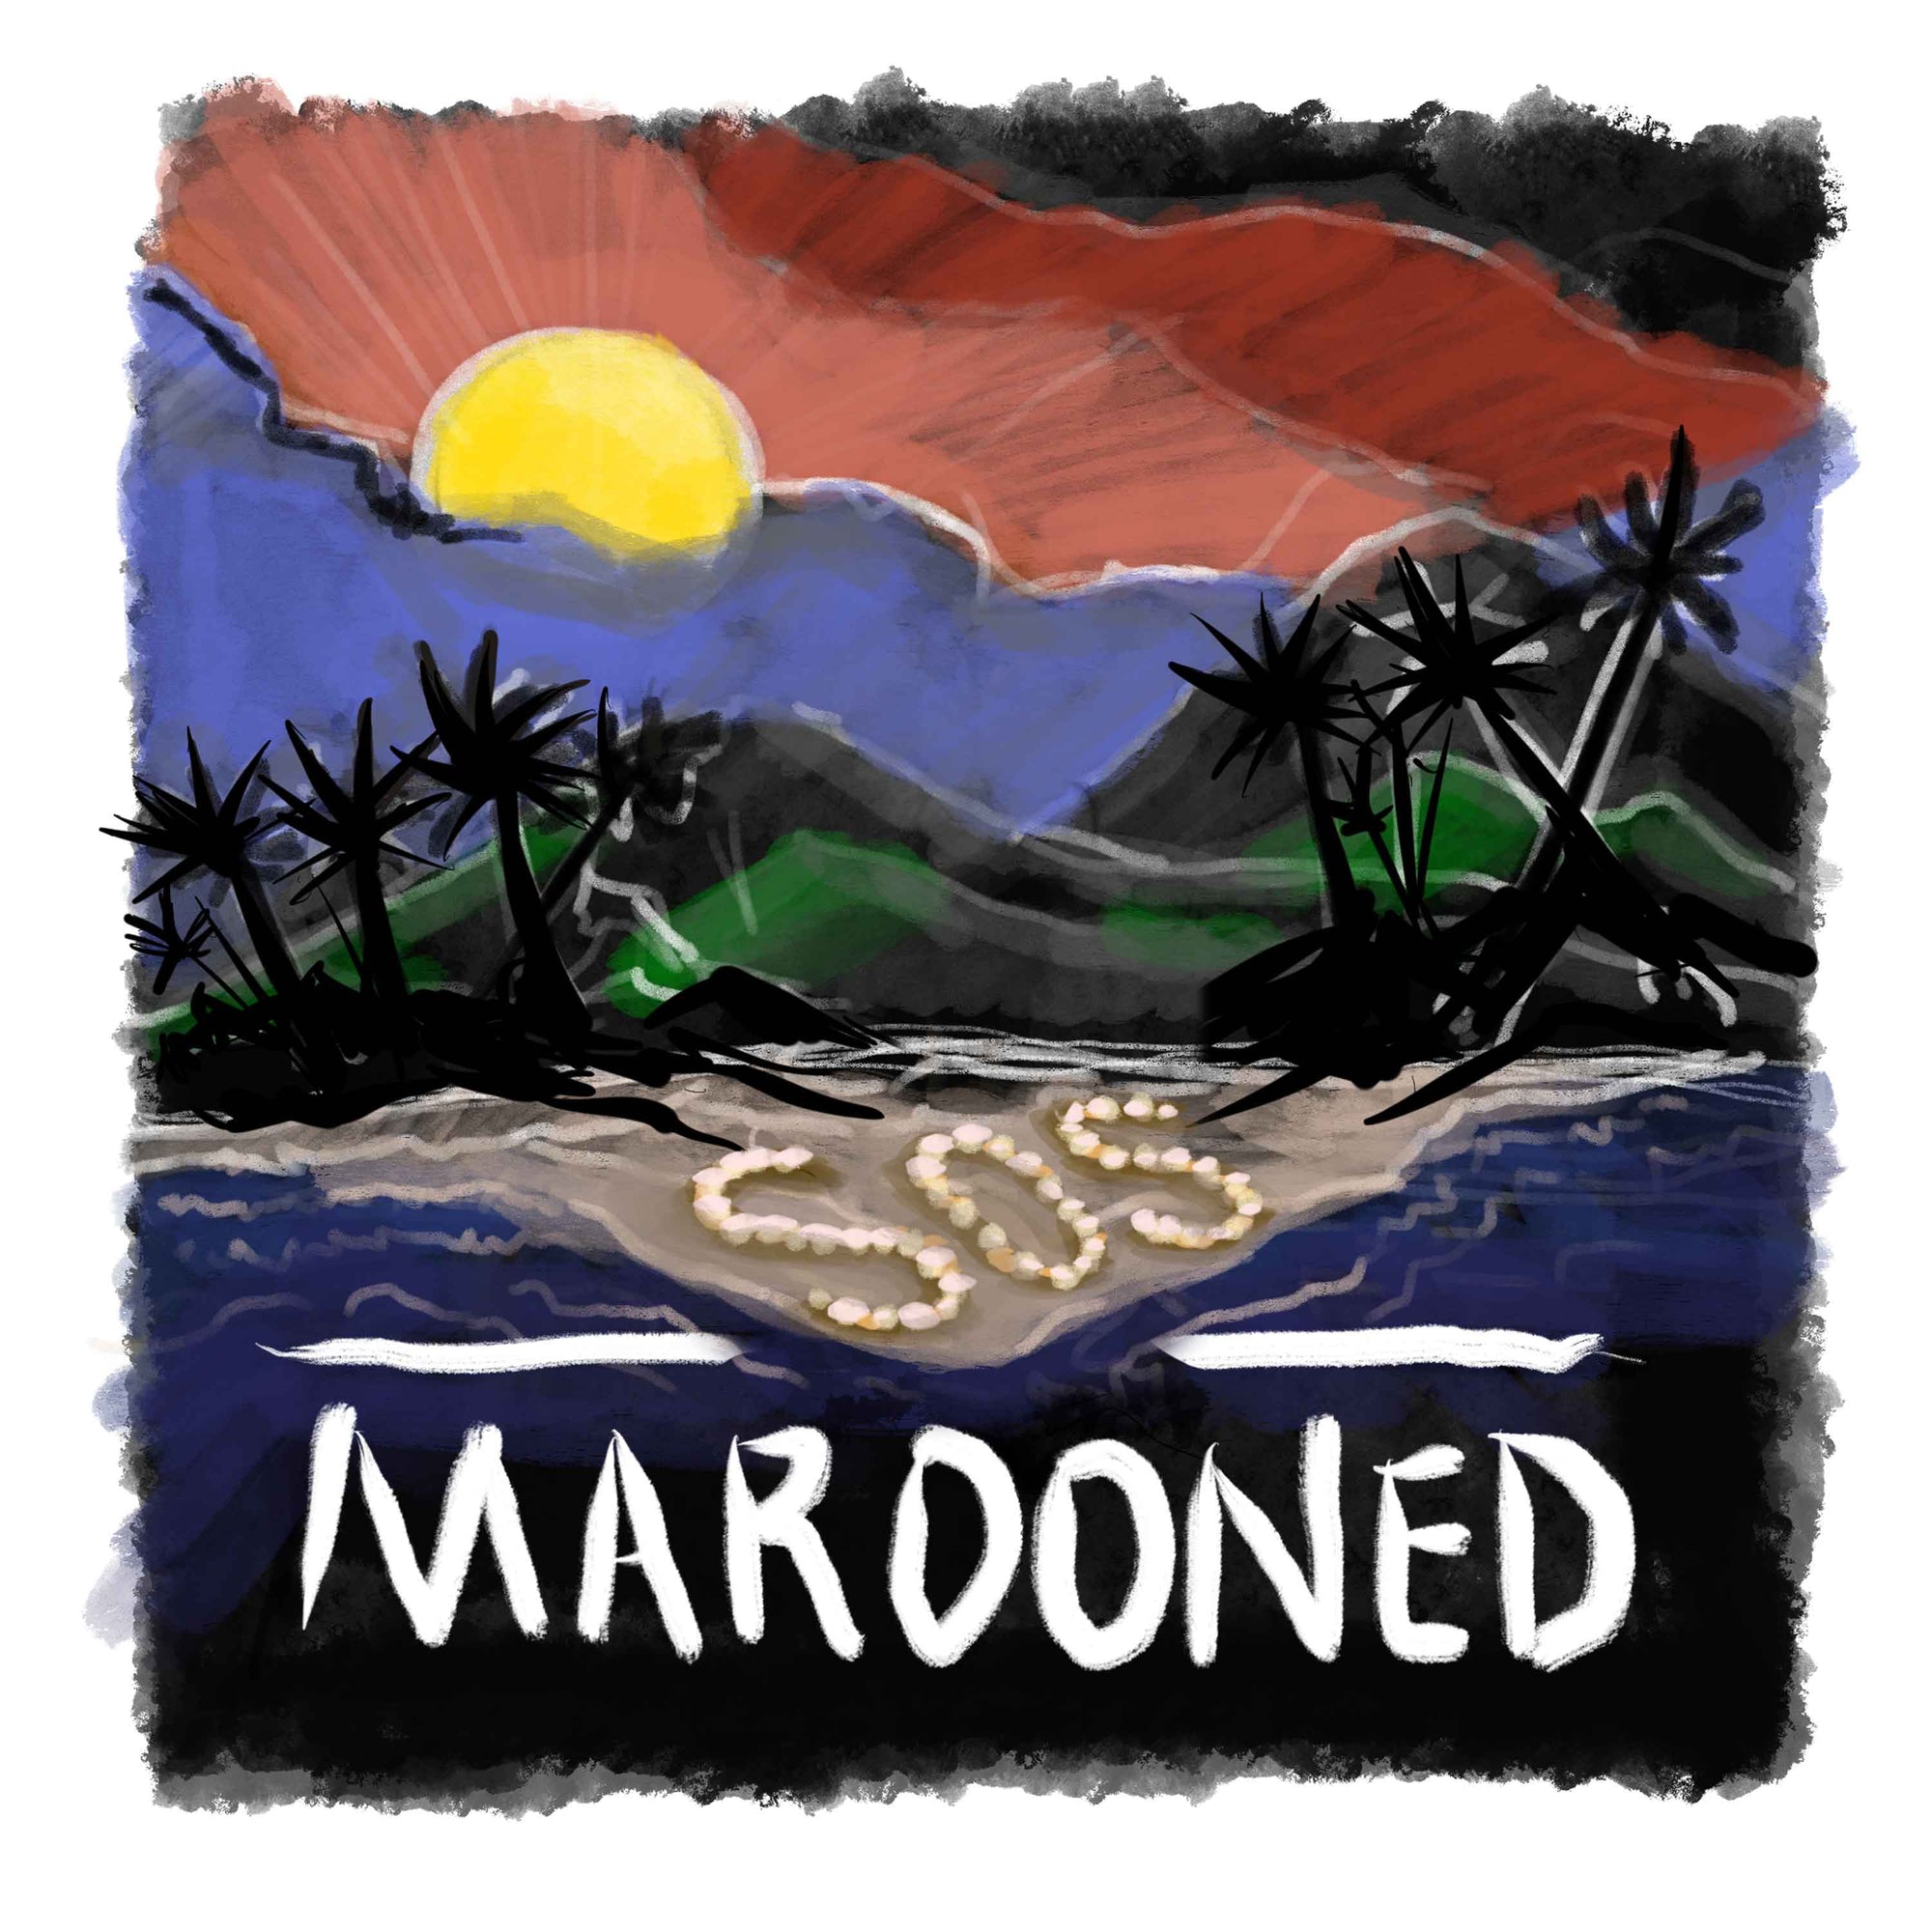 Subscribe to Marooned Aaron's new podcast